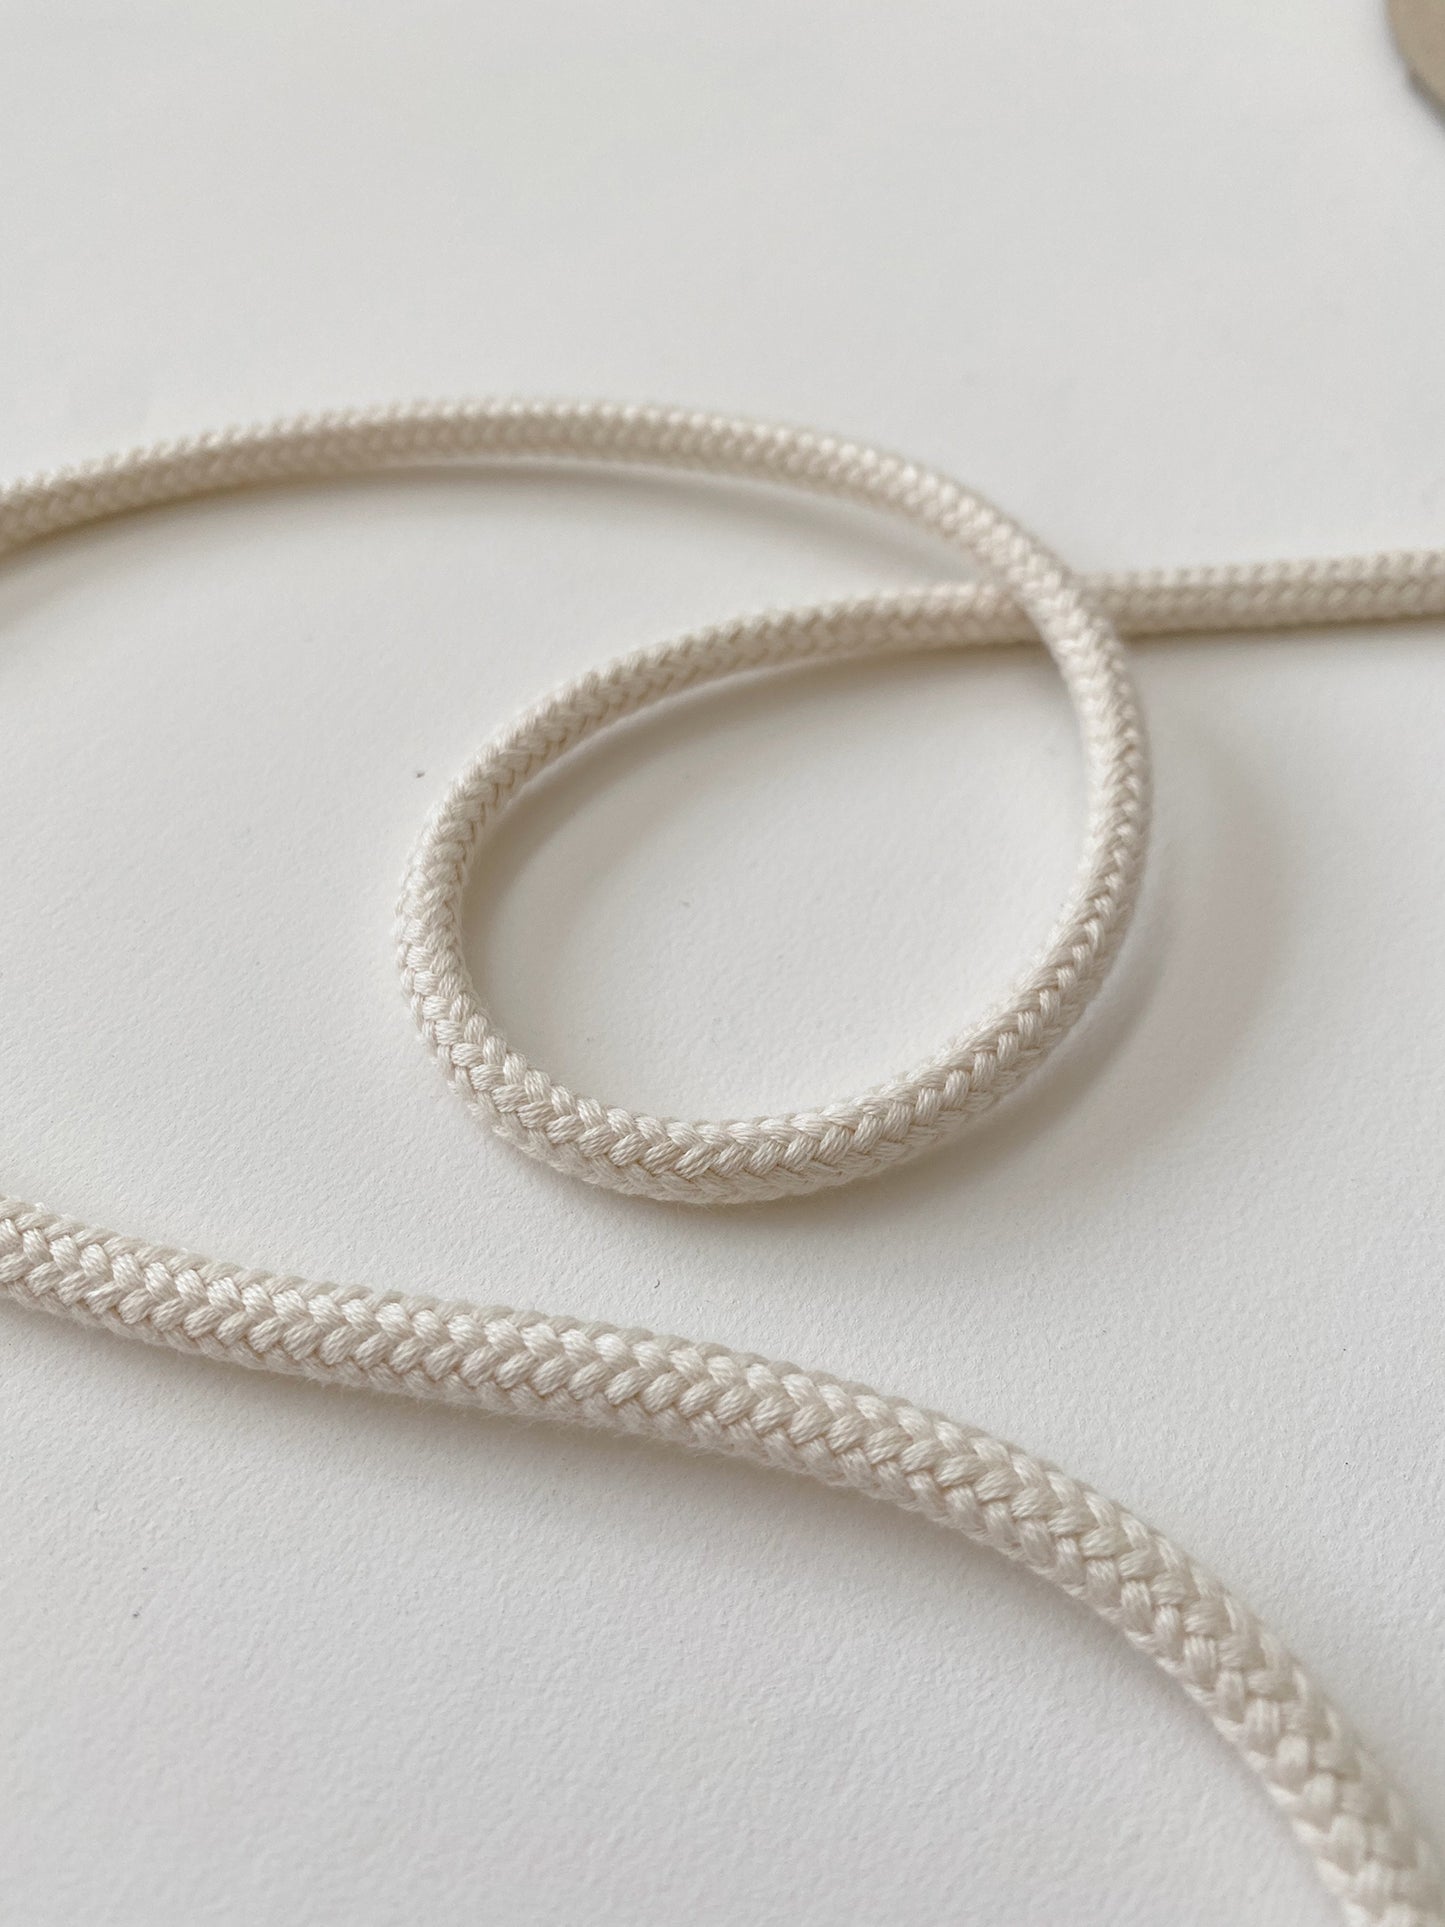 5mm Cord - 100% Cotton - Undyed